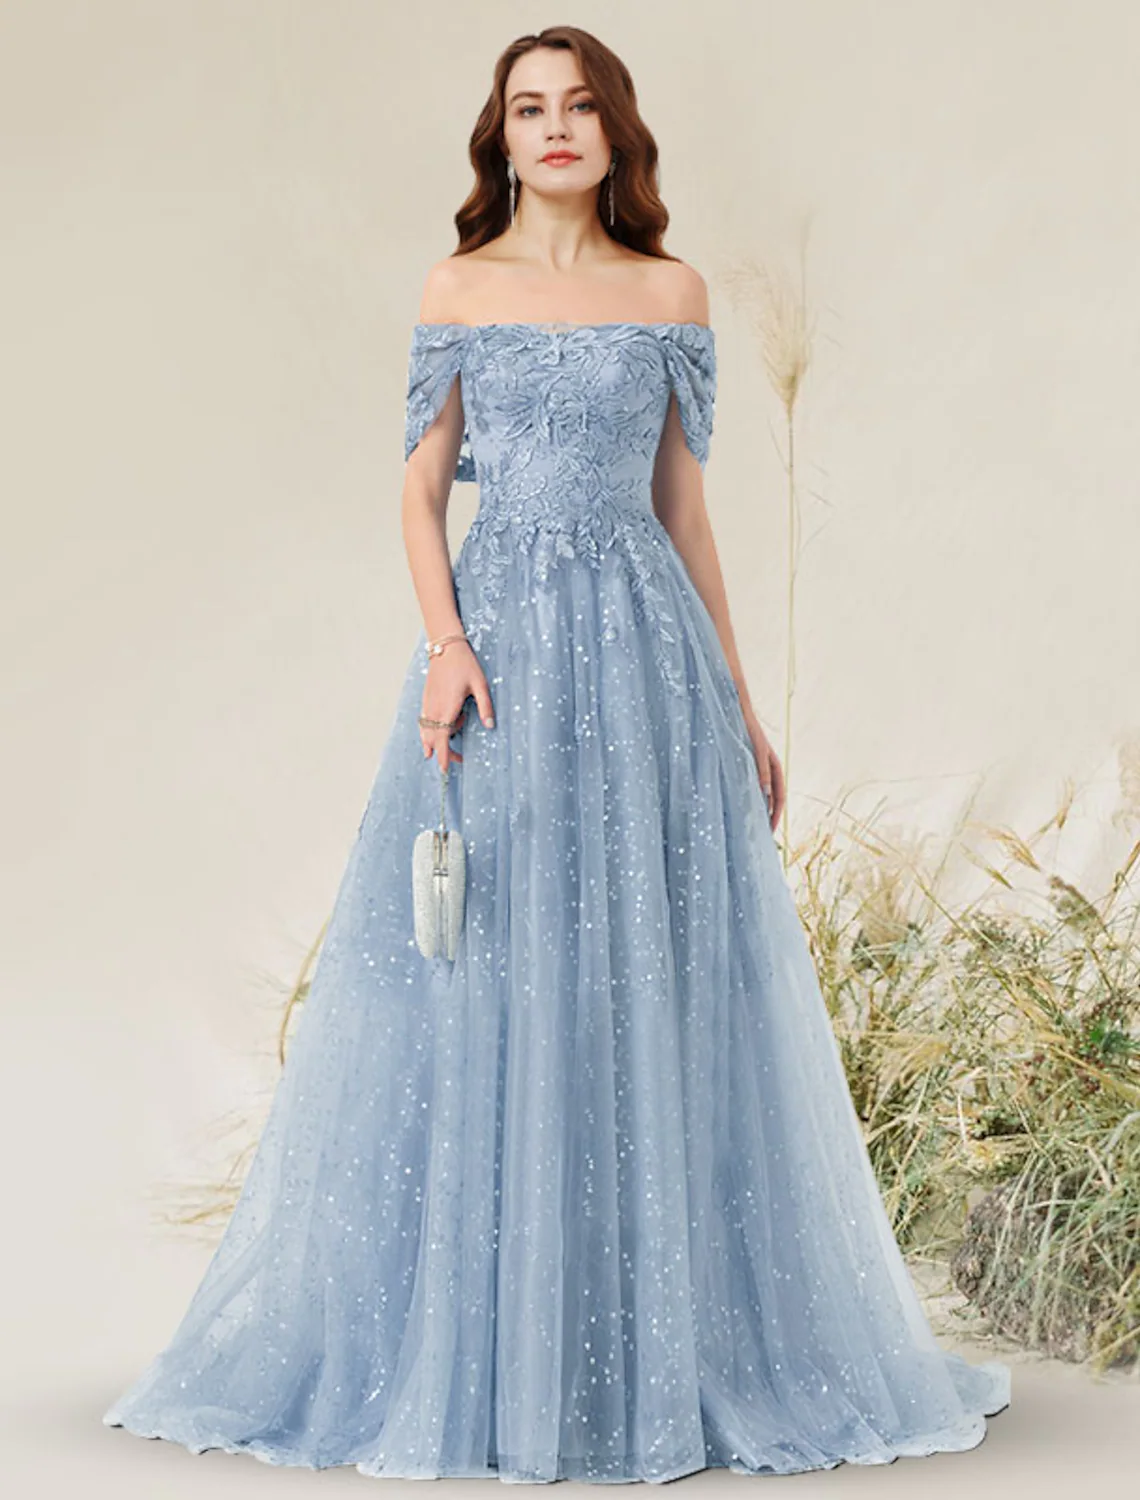 A-Line Prom Dresses Elegant Dress Wedding Guest Sweep / Brush Train Sleeveless Off Shoulder Lace with Pleats